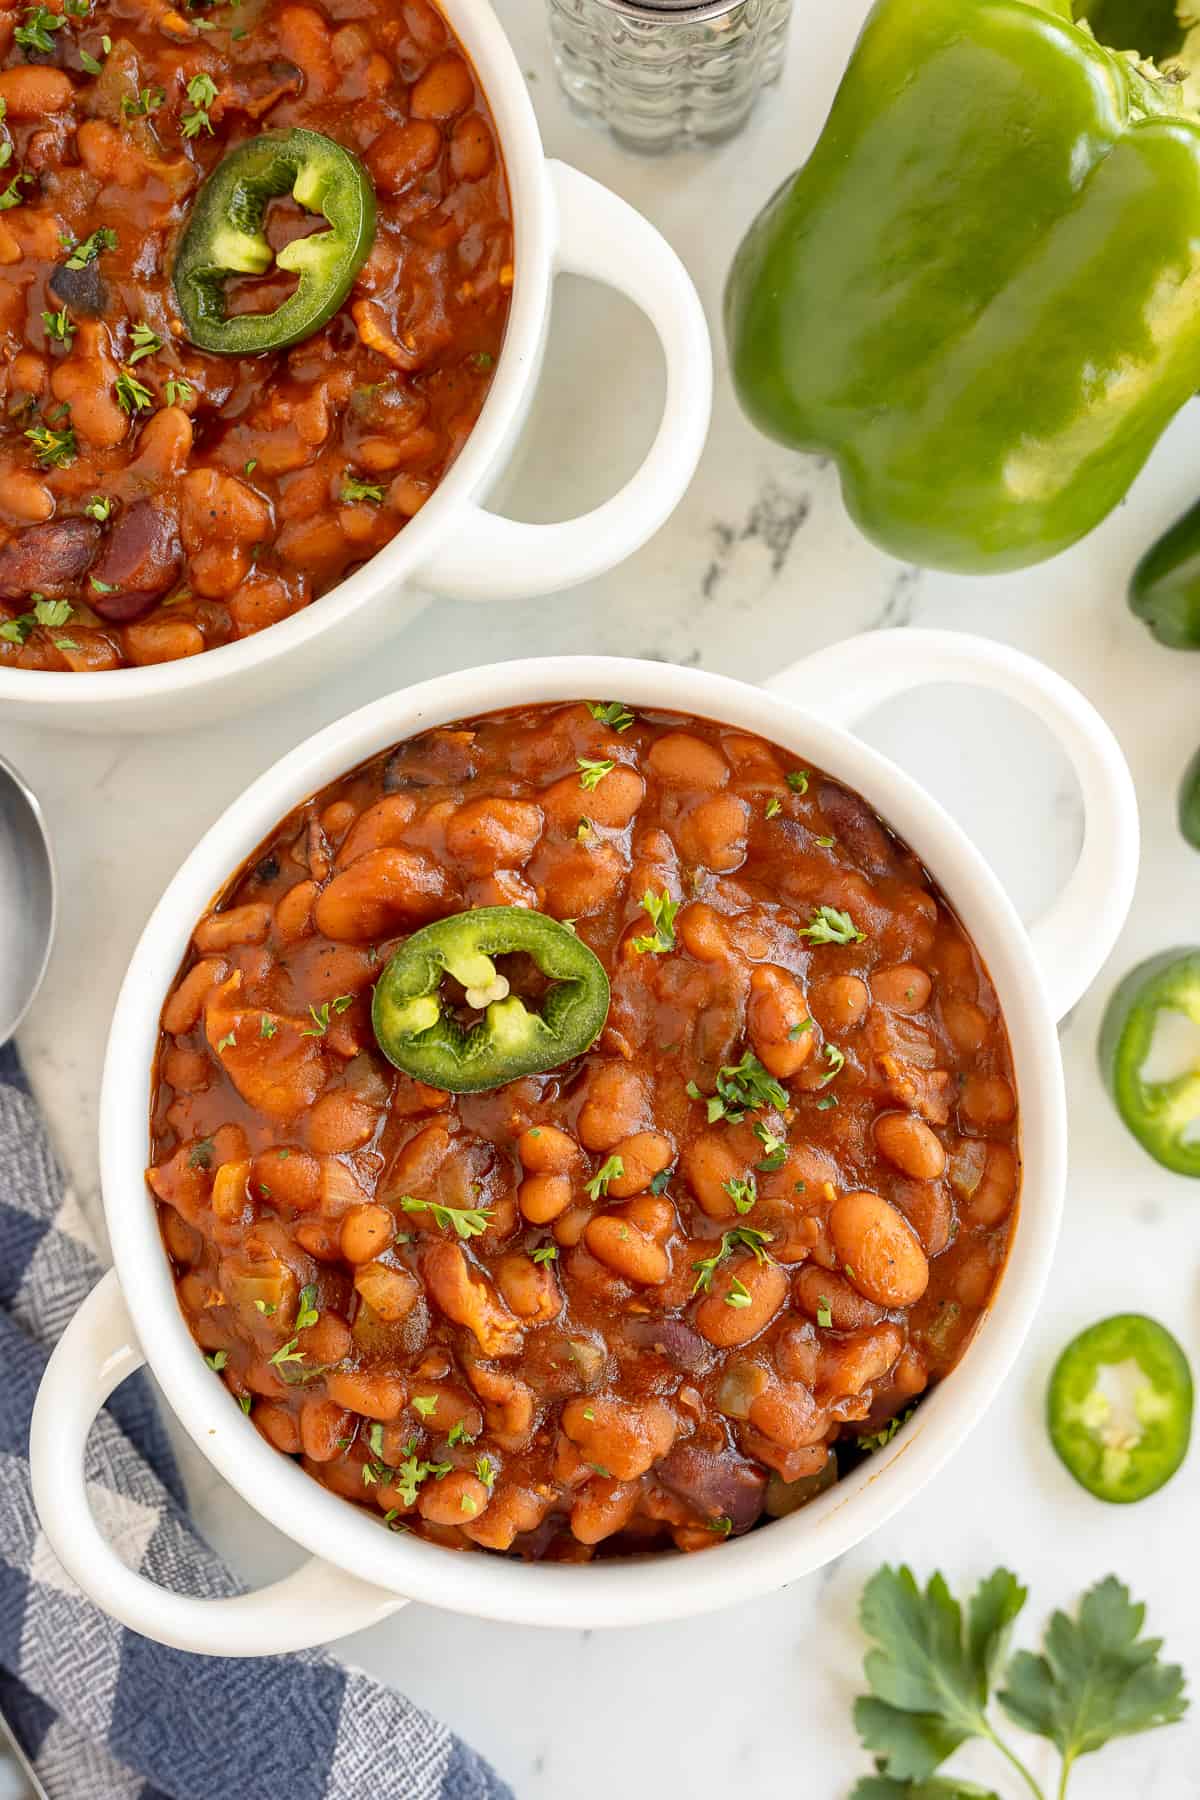 Baked beans with jalapeno in white handled bowls.